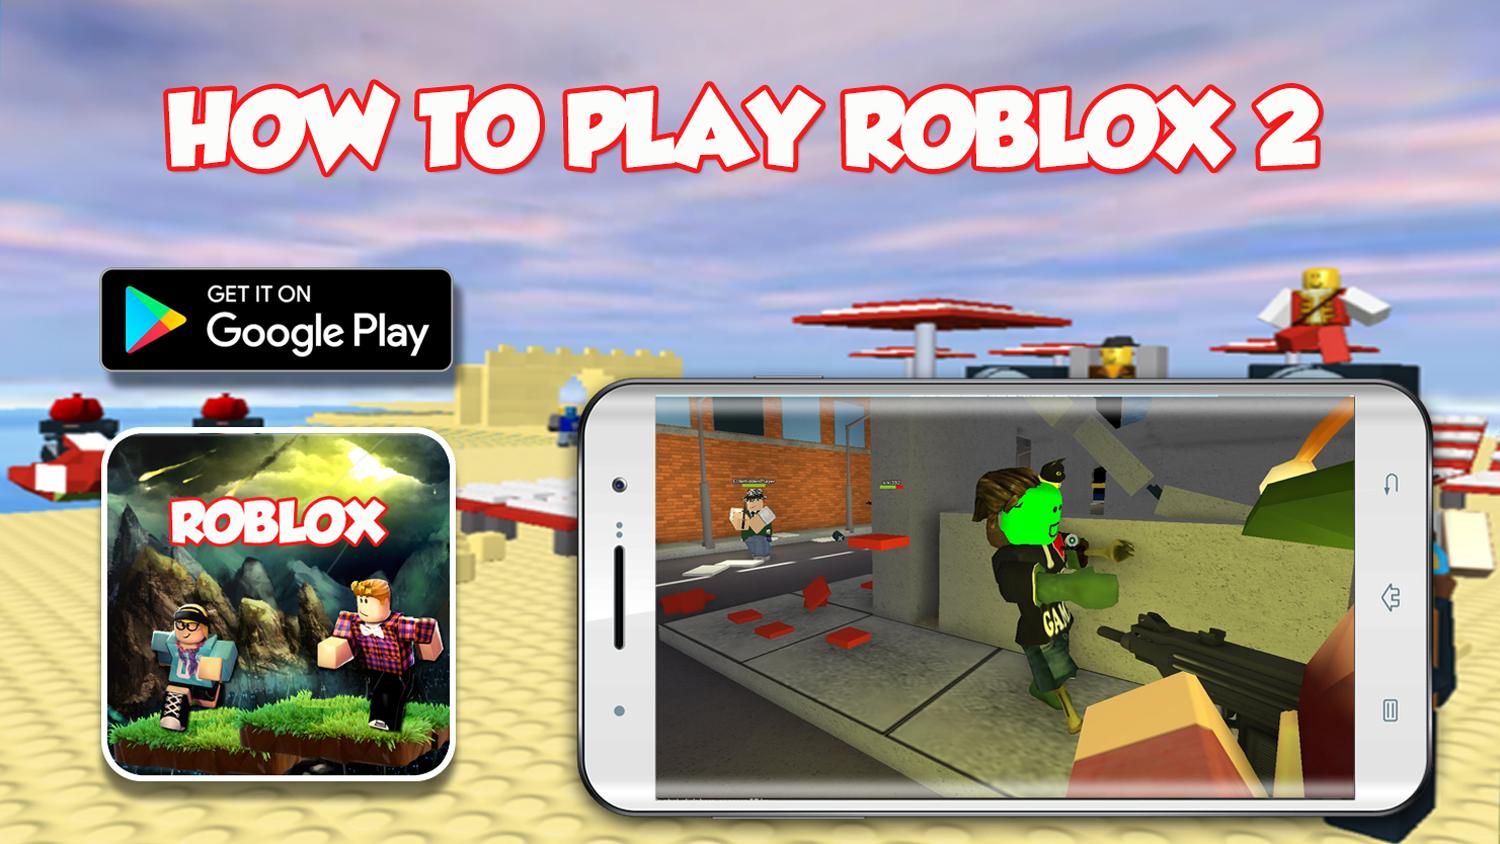 Guide For Roblox 2 Free For Android Apk Download - guide of roblox 2 new version for android apk download